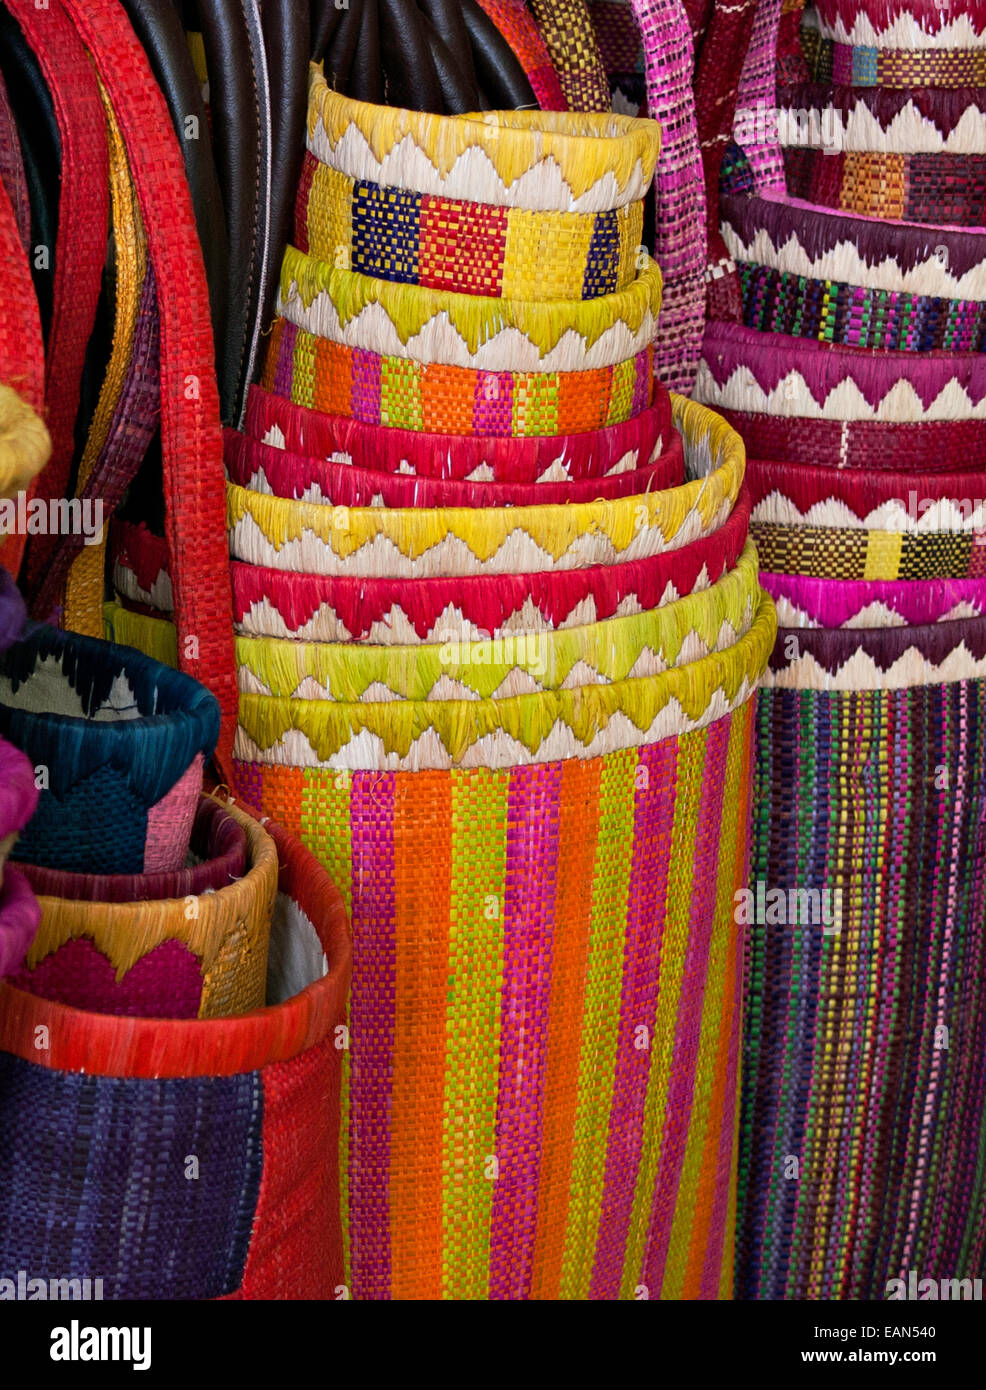 Colourful bags on sale to tourists as souvenirs of Spain Stock Photo